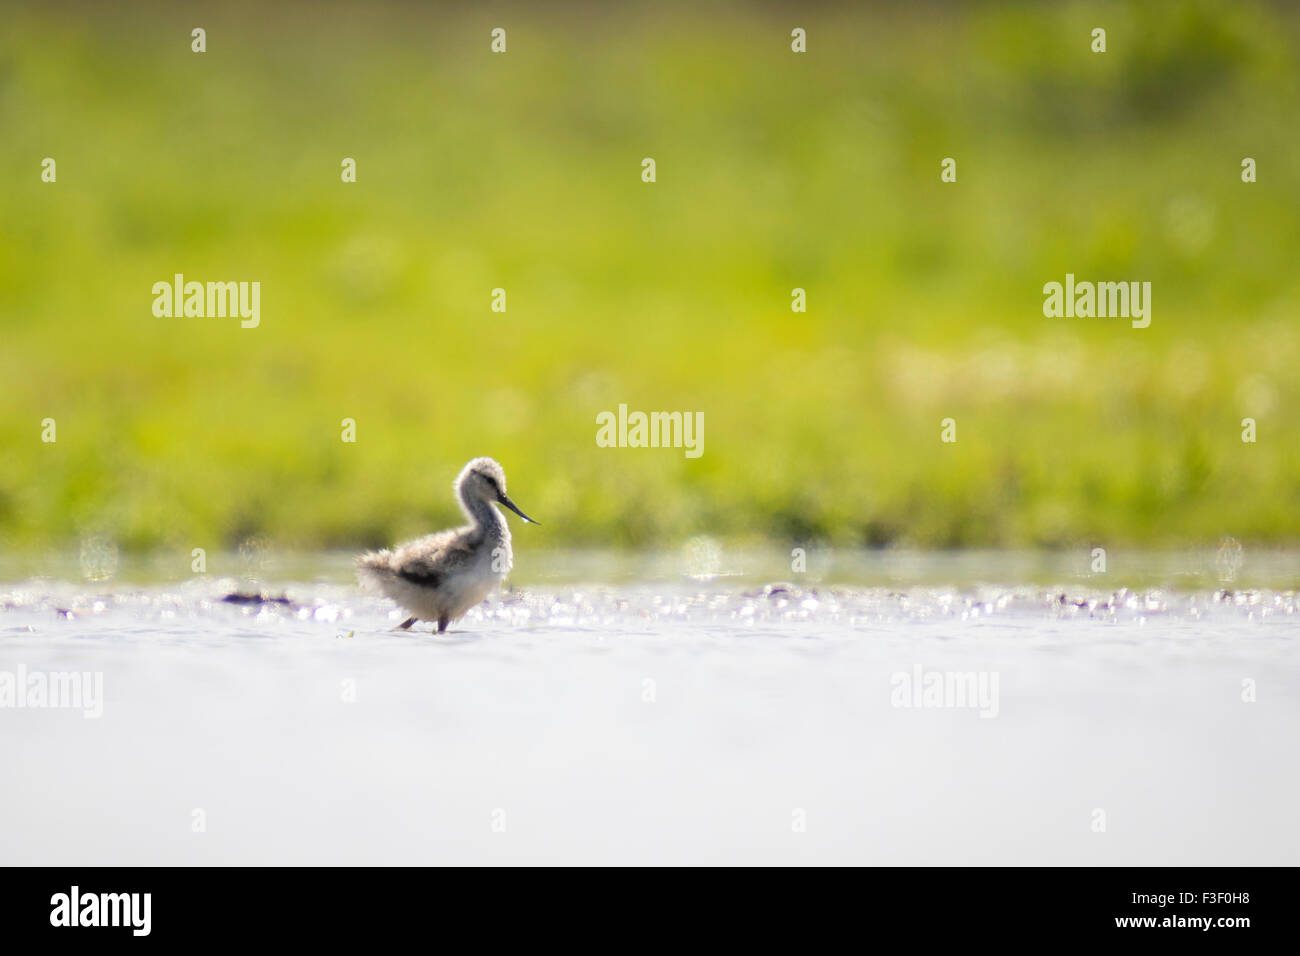 Pied Avocet chick walking through water, a lot of negative space is used in this composition Stock Photo